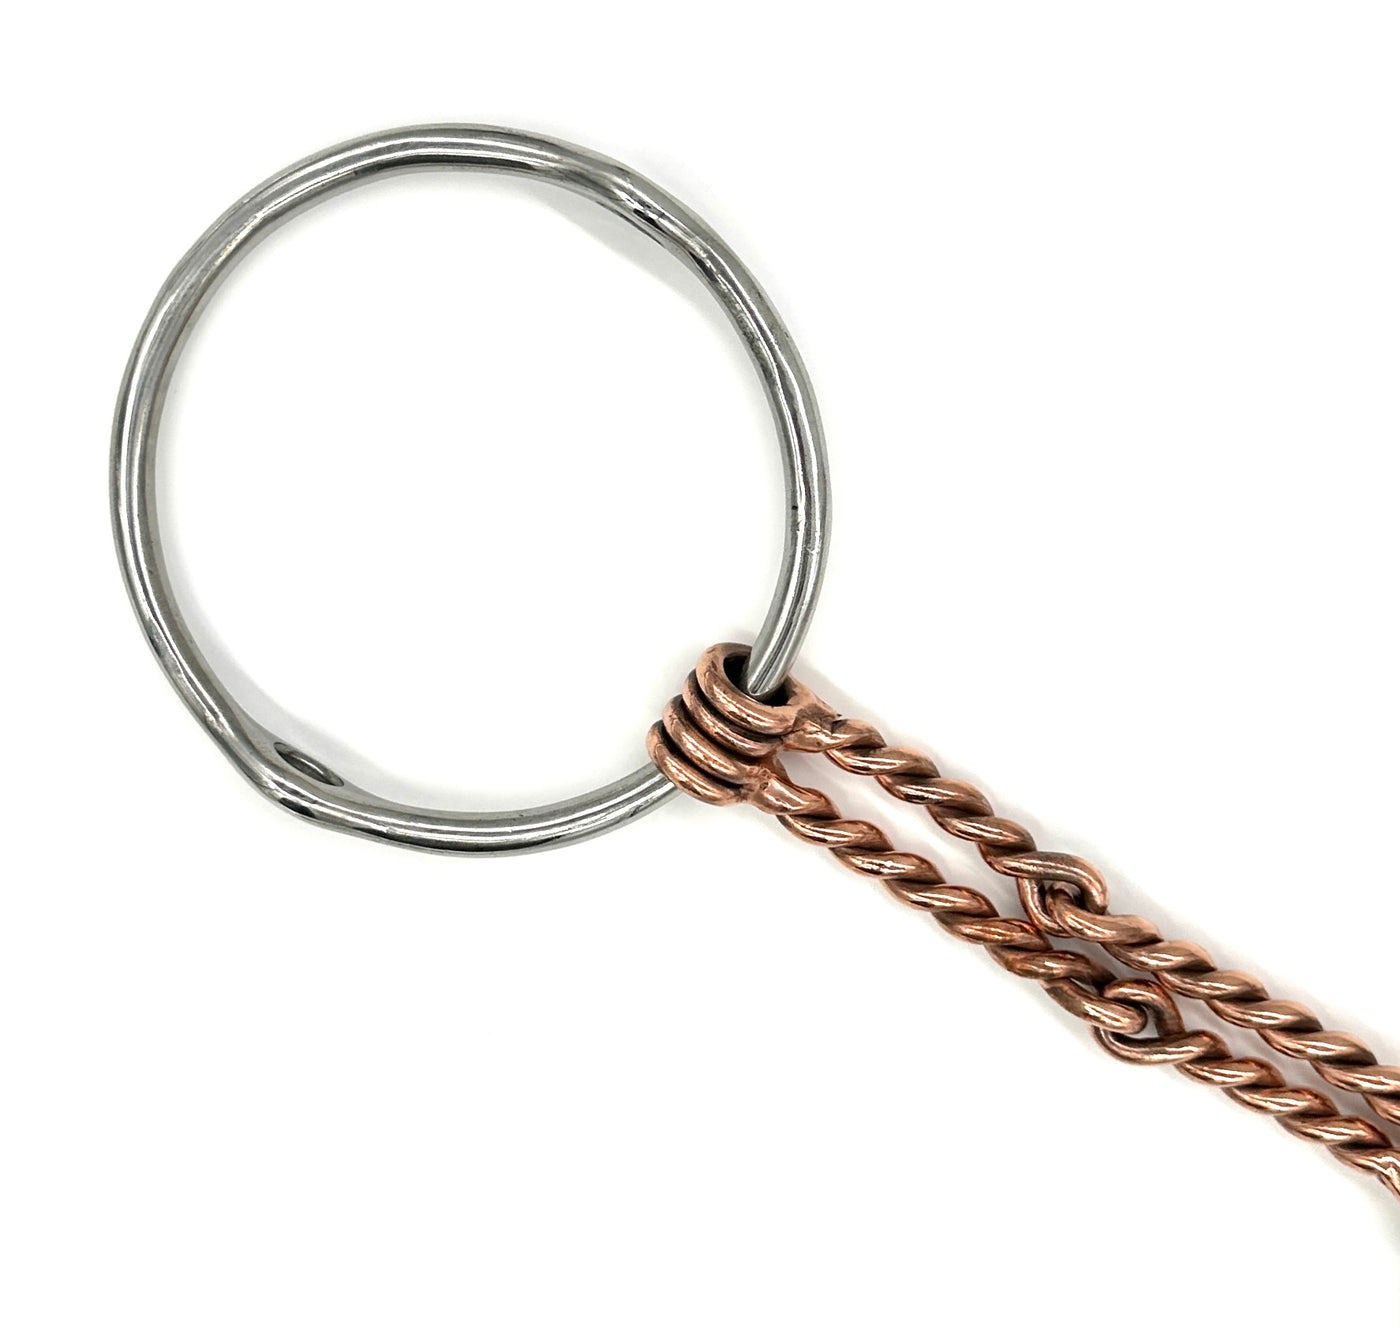 Large Ring Copper Double Twisted Wire Balding Gag Bit